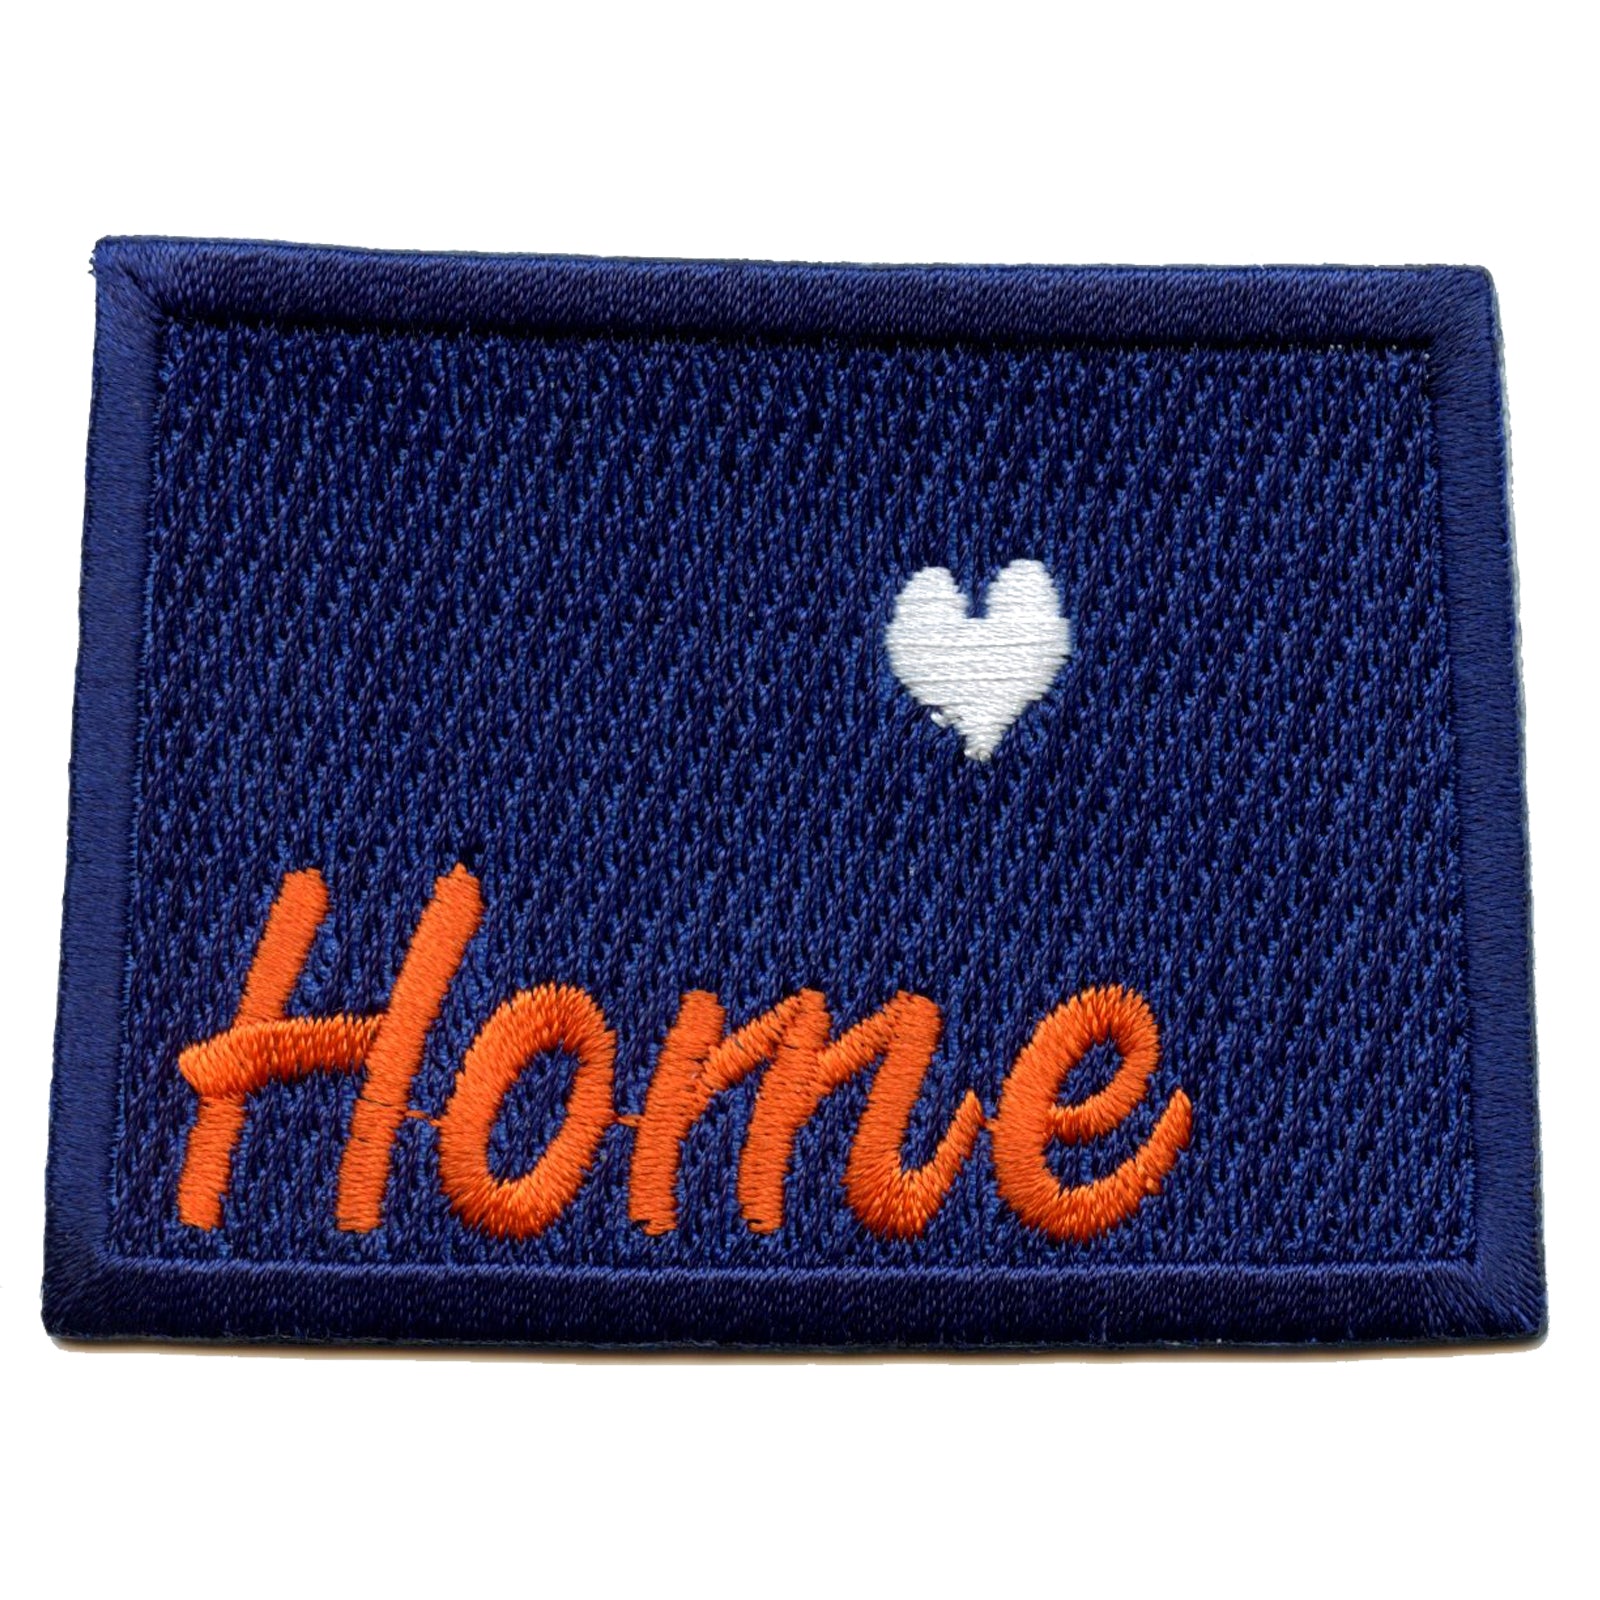 Colorado Home State Embroidered Iron On Patch 